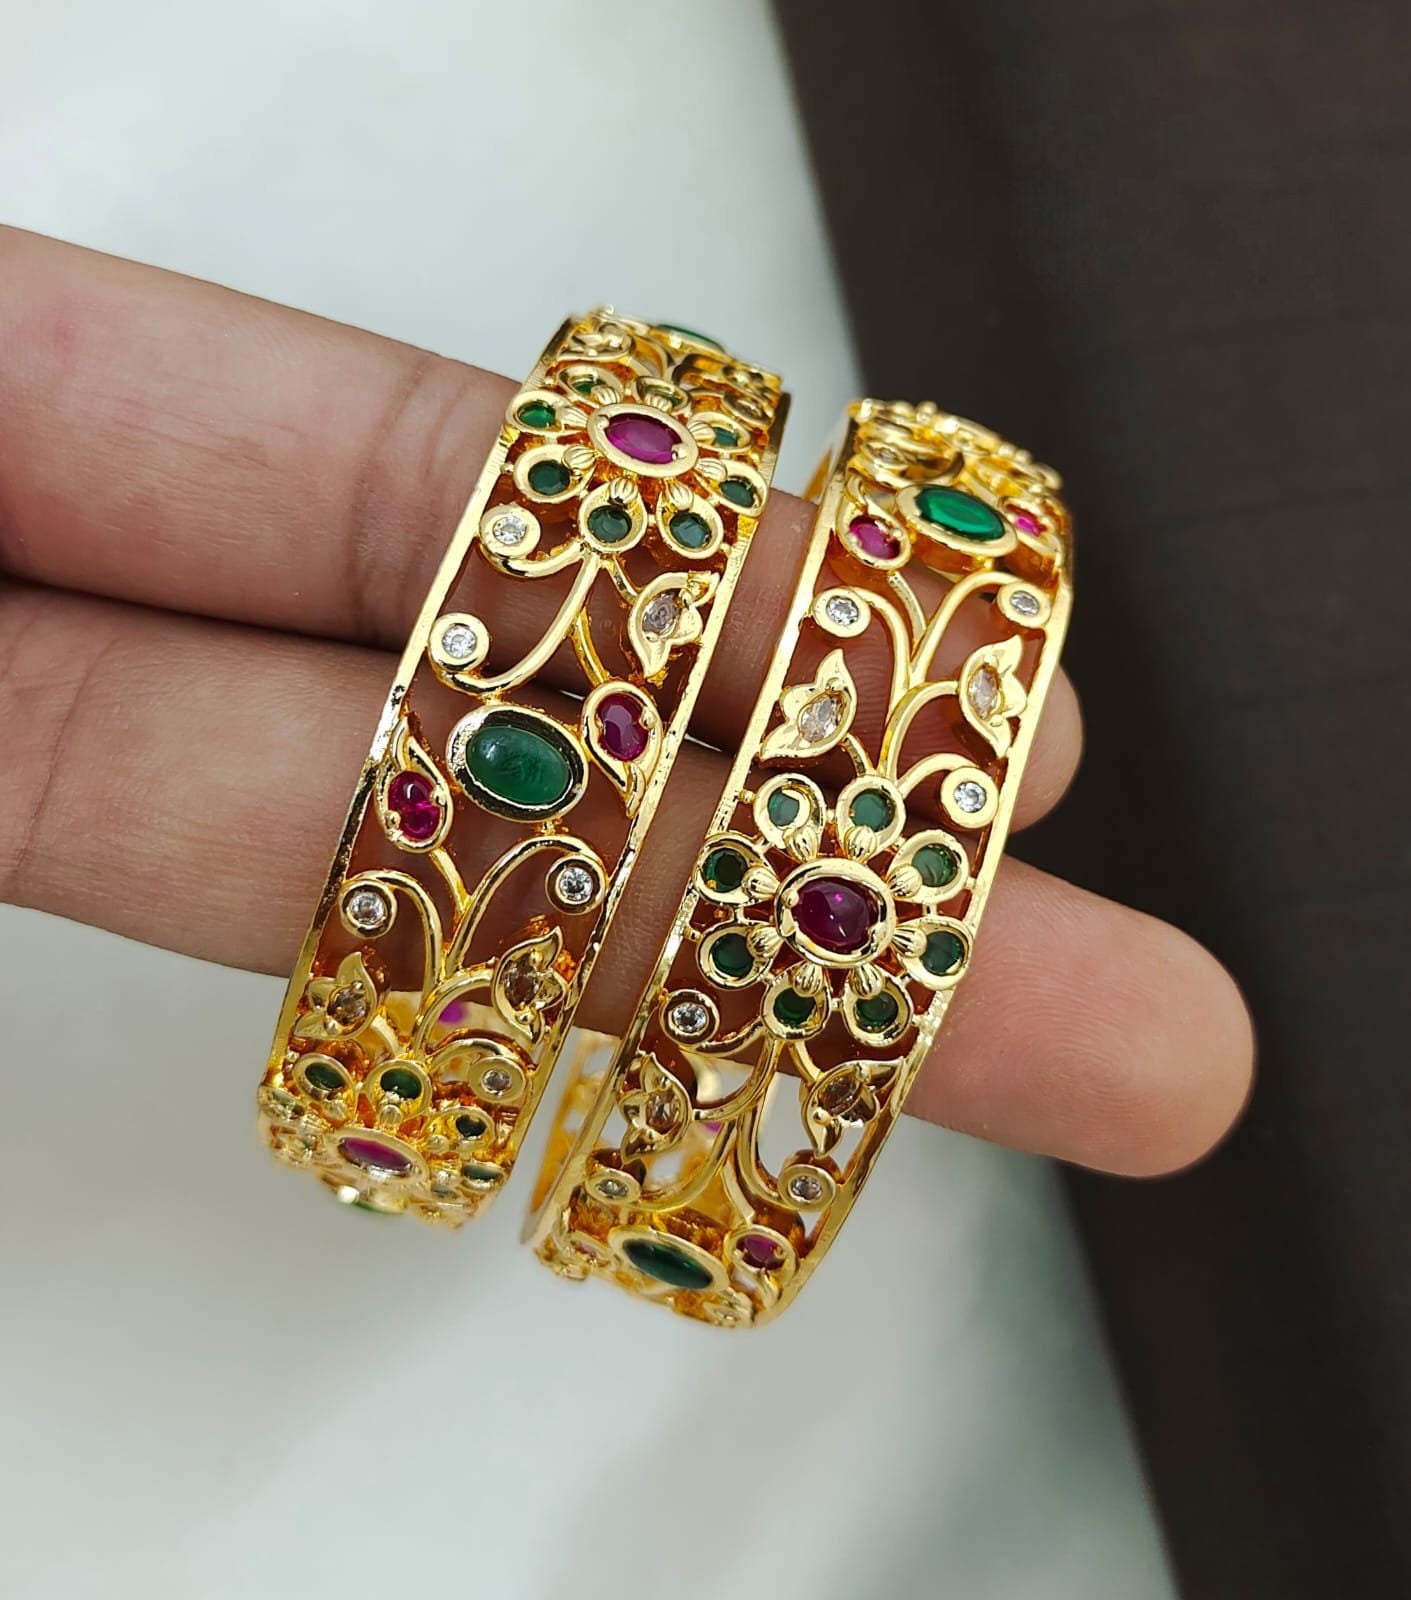 Gold vanki finger rings collection|Yogitha|Gold Wedding Rings designs|South  Indian Wedding Ring Des - YouTube